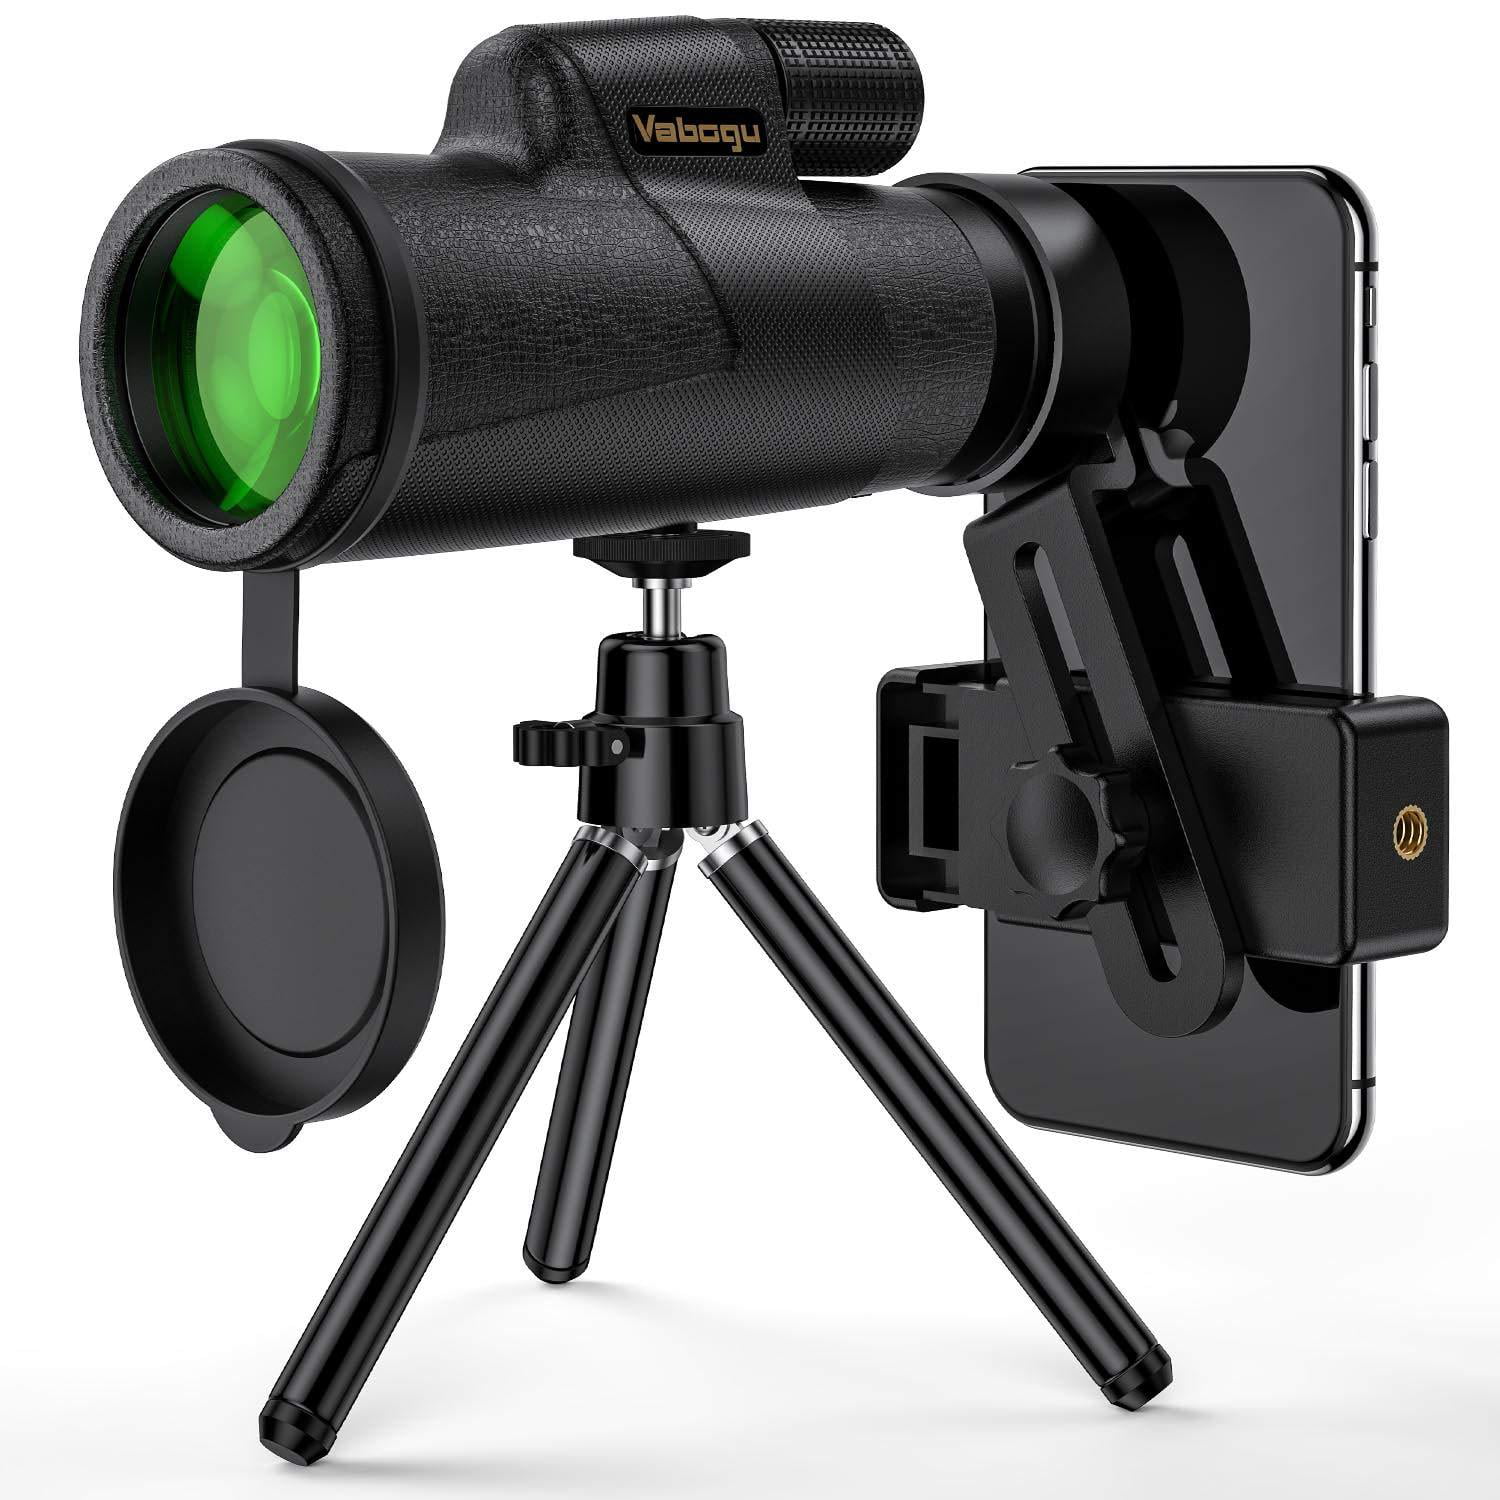 Ellatross Monocular Telescope for Smartphone,Handheld Telescope for Adults with 12X50 HD High Power,for Bird Watching,Wildlife,Concert,Camping,Sporting Game 